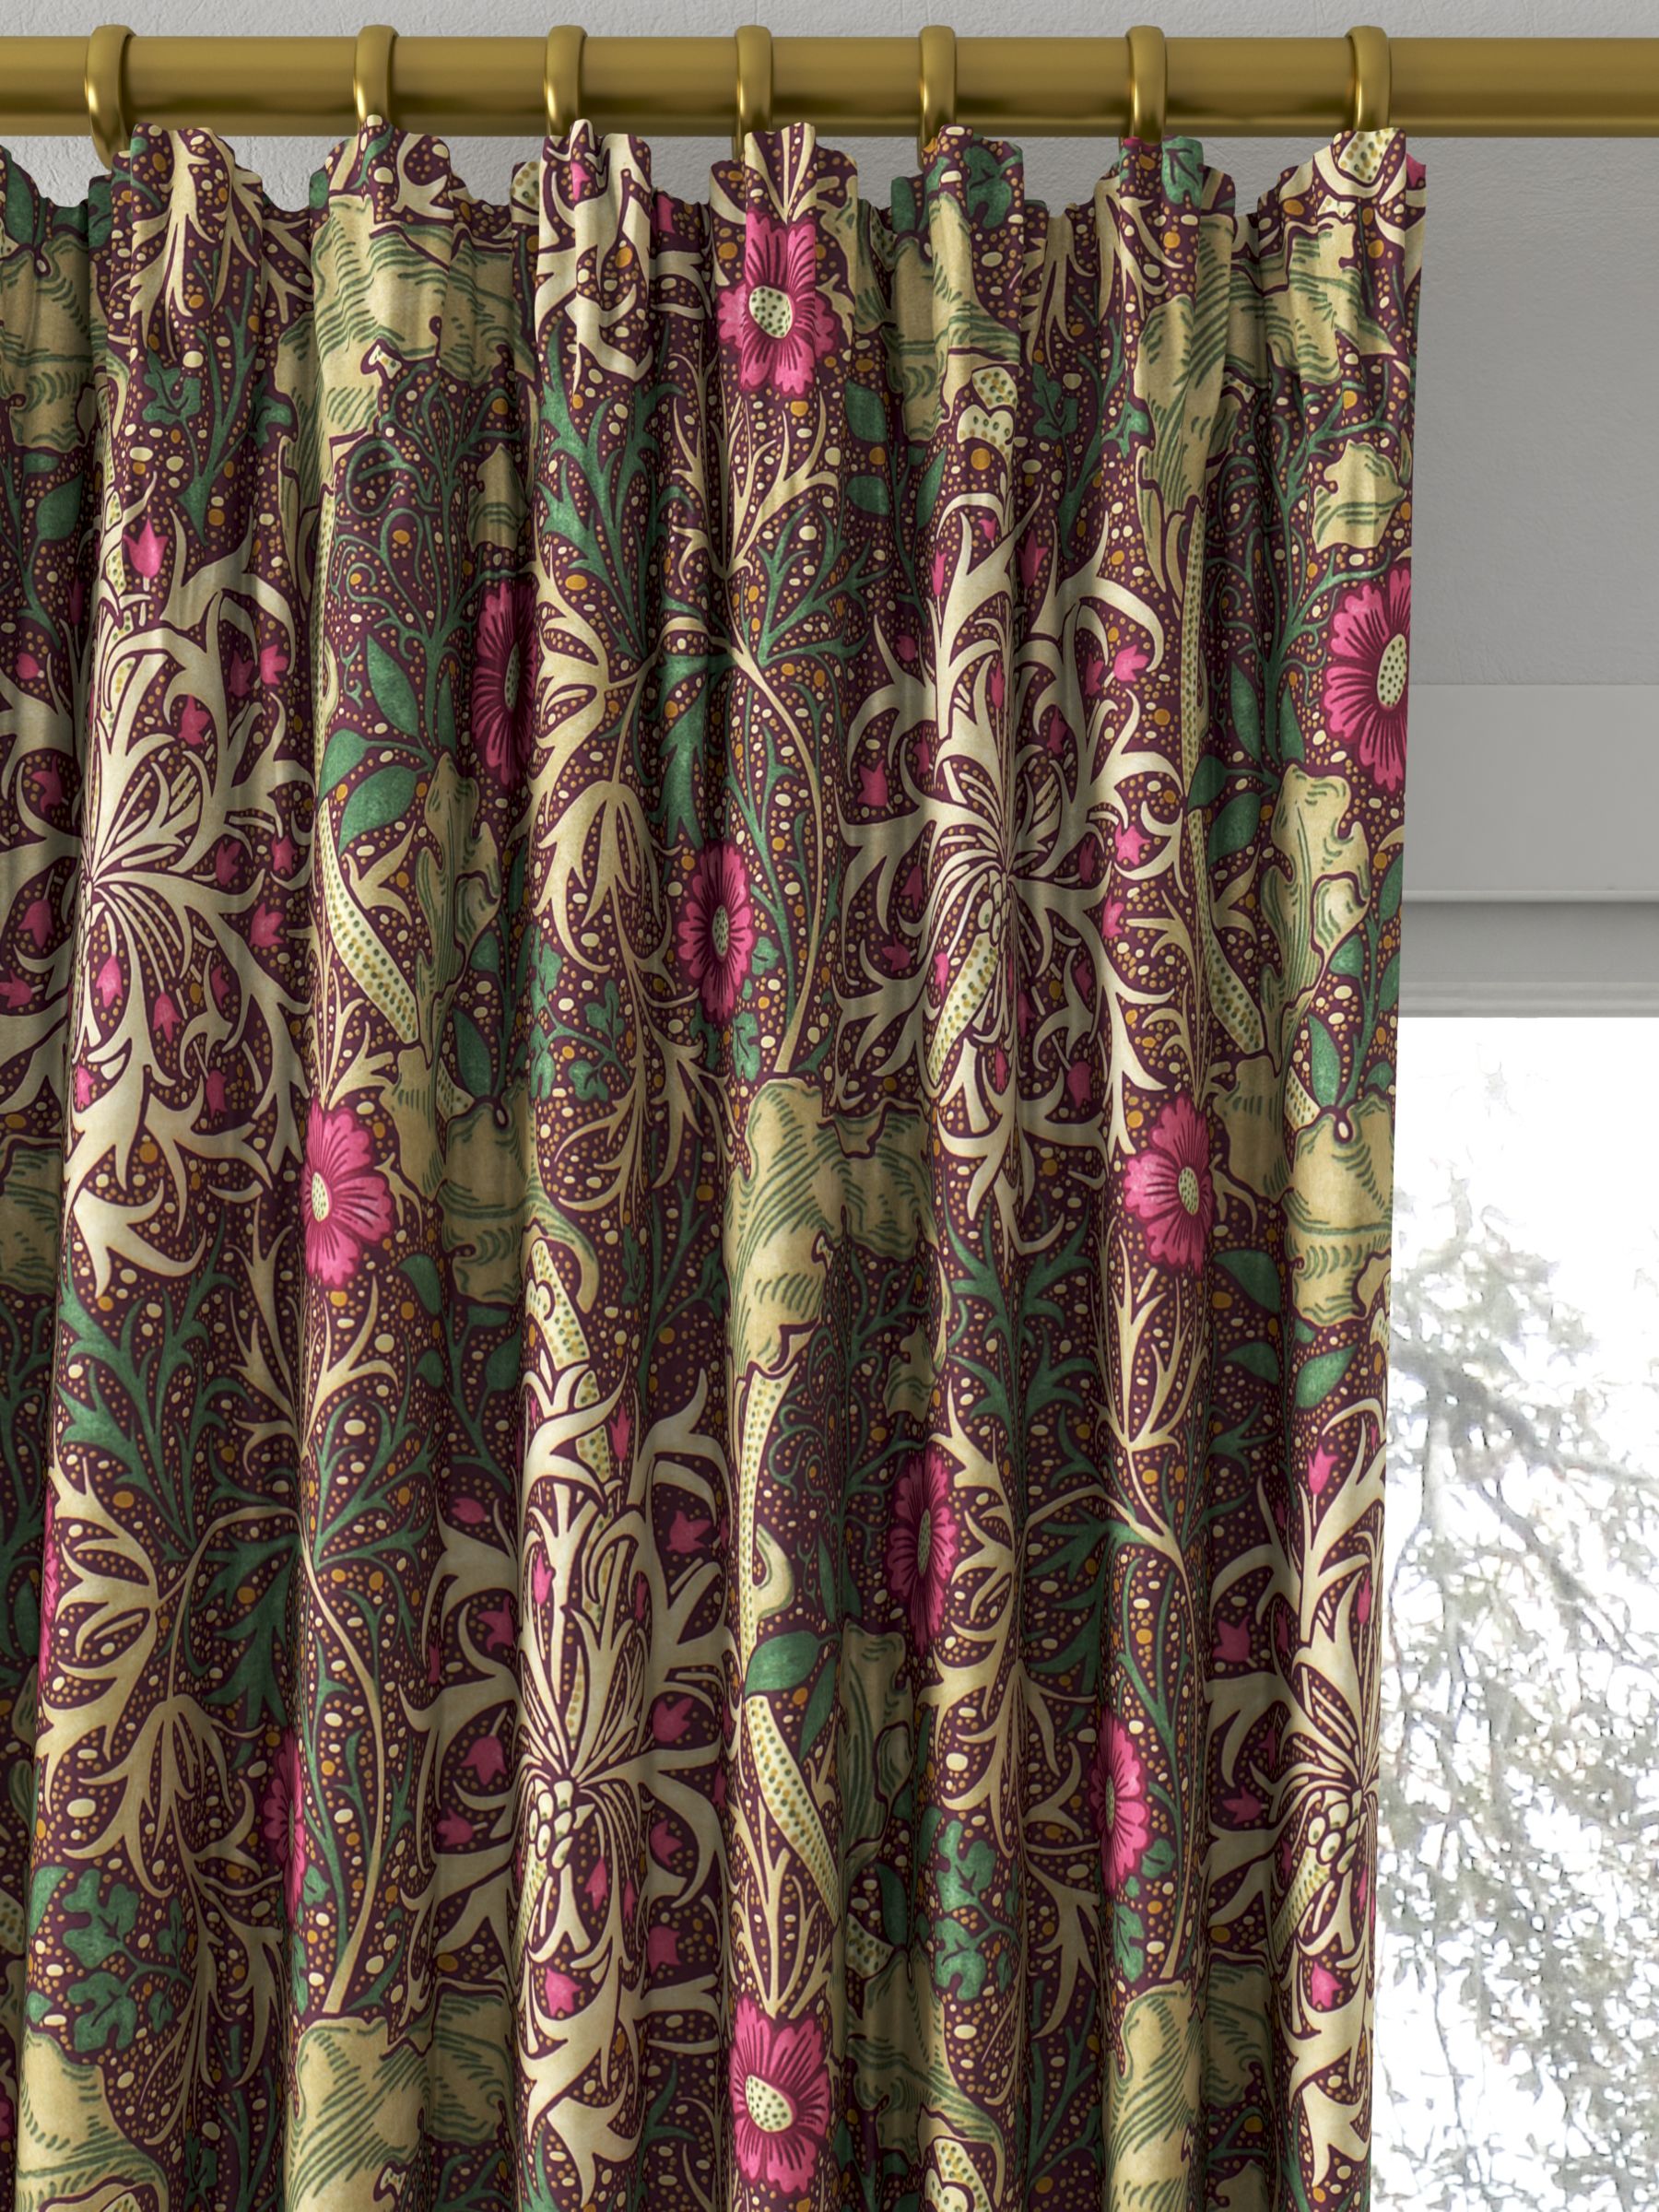 Morris & Co. The Brook Tapestry Made to Measure Curtains, Tapestry Red